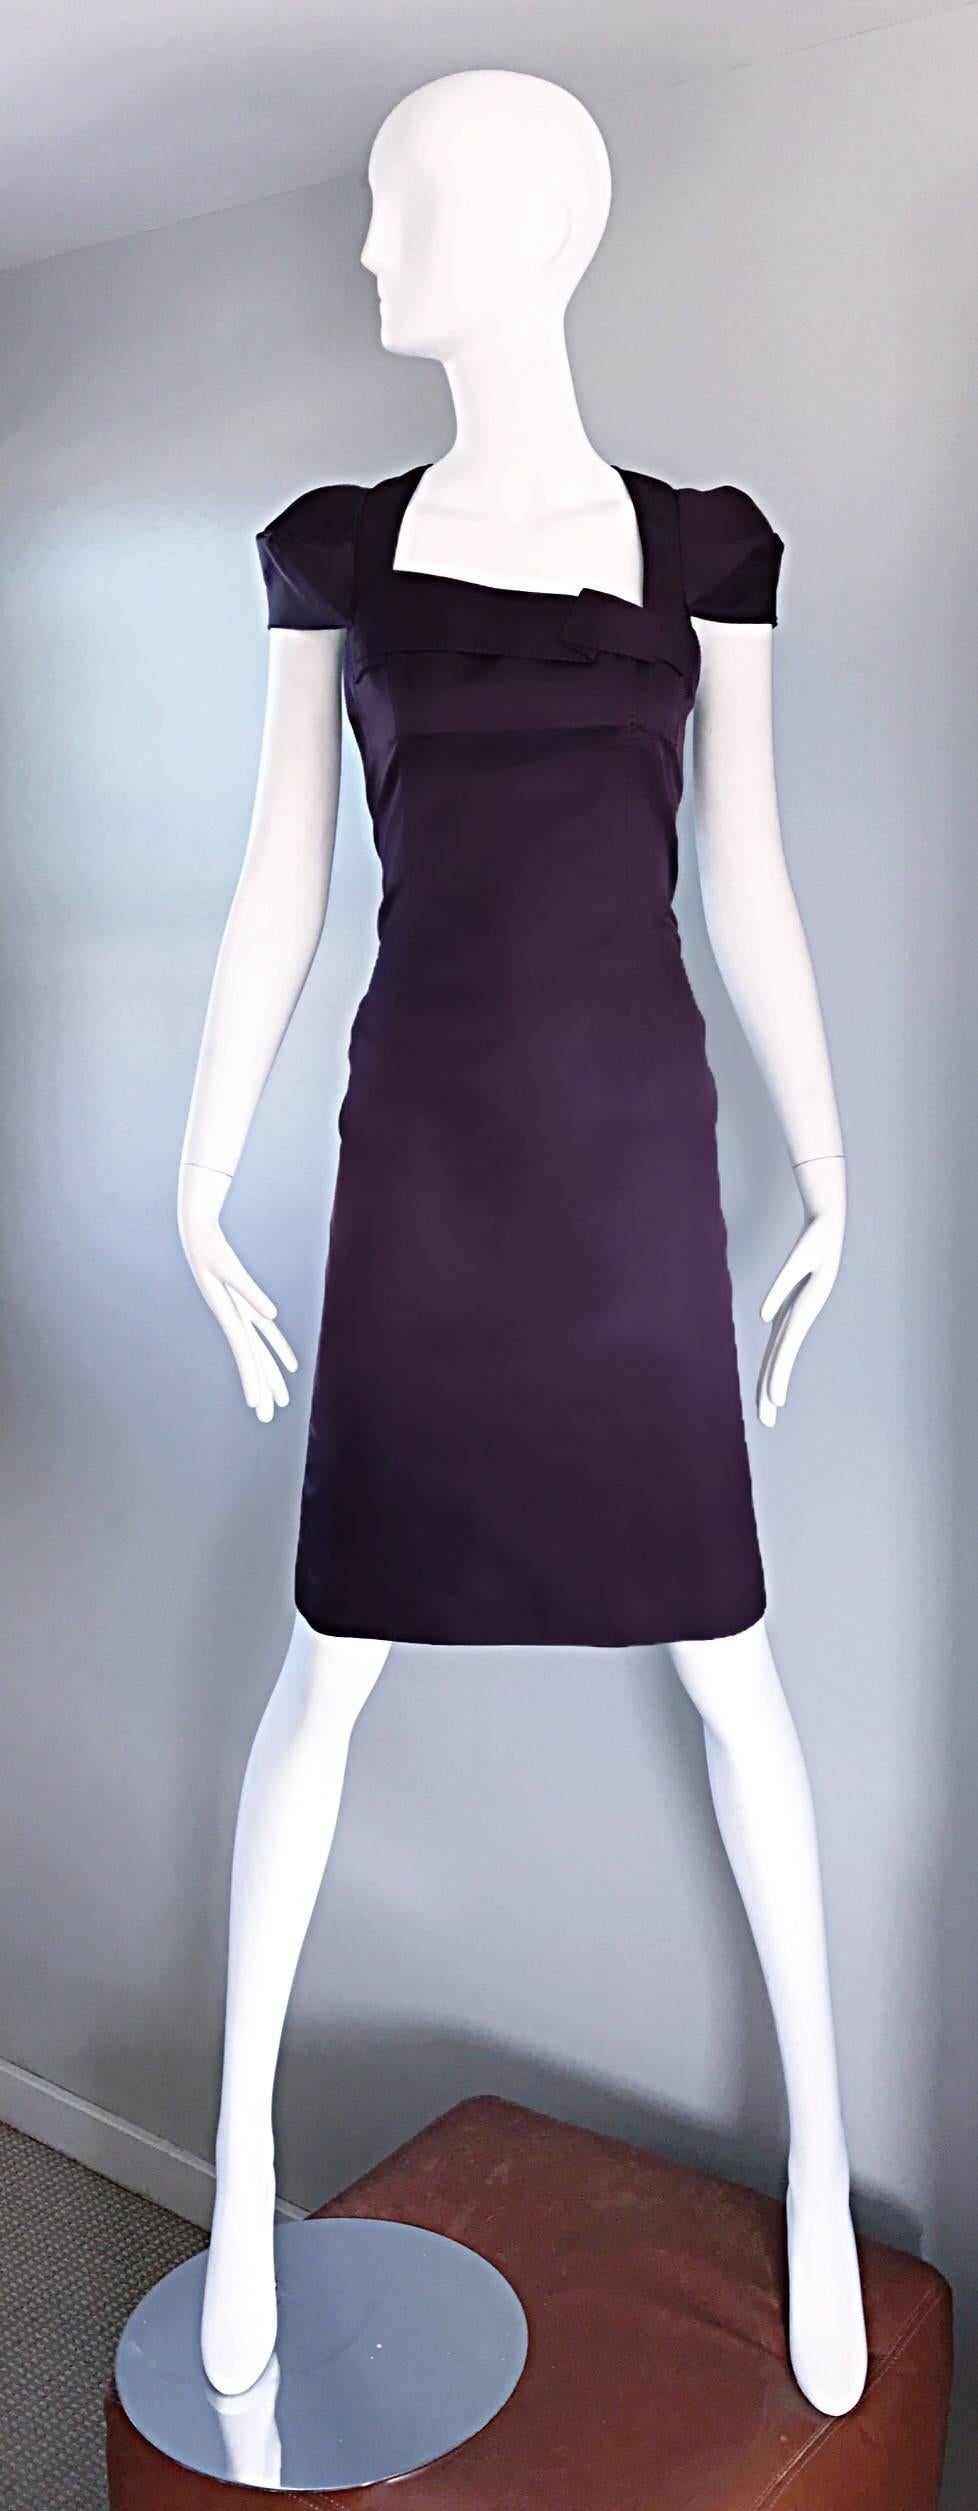 Beautiful and flattering eggplant color Italian dress by sought after label 6267! Tommaso Aquilano and Roberto Rimondi were the masterminds behind this short lived label. After breaking into the fashion industry as lead designers for Max Mara, the